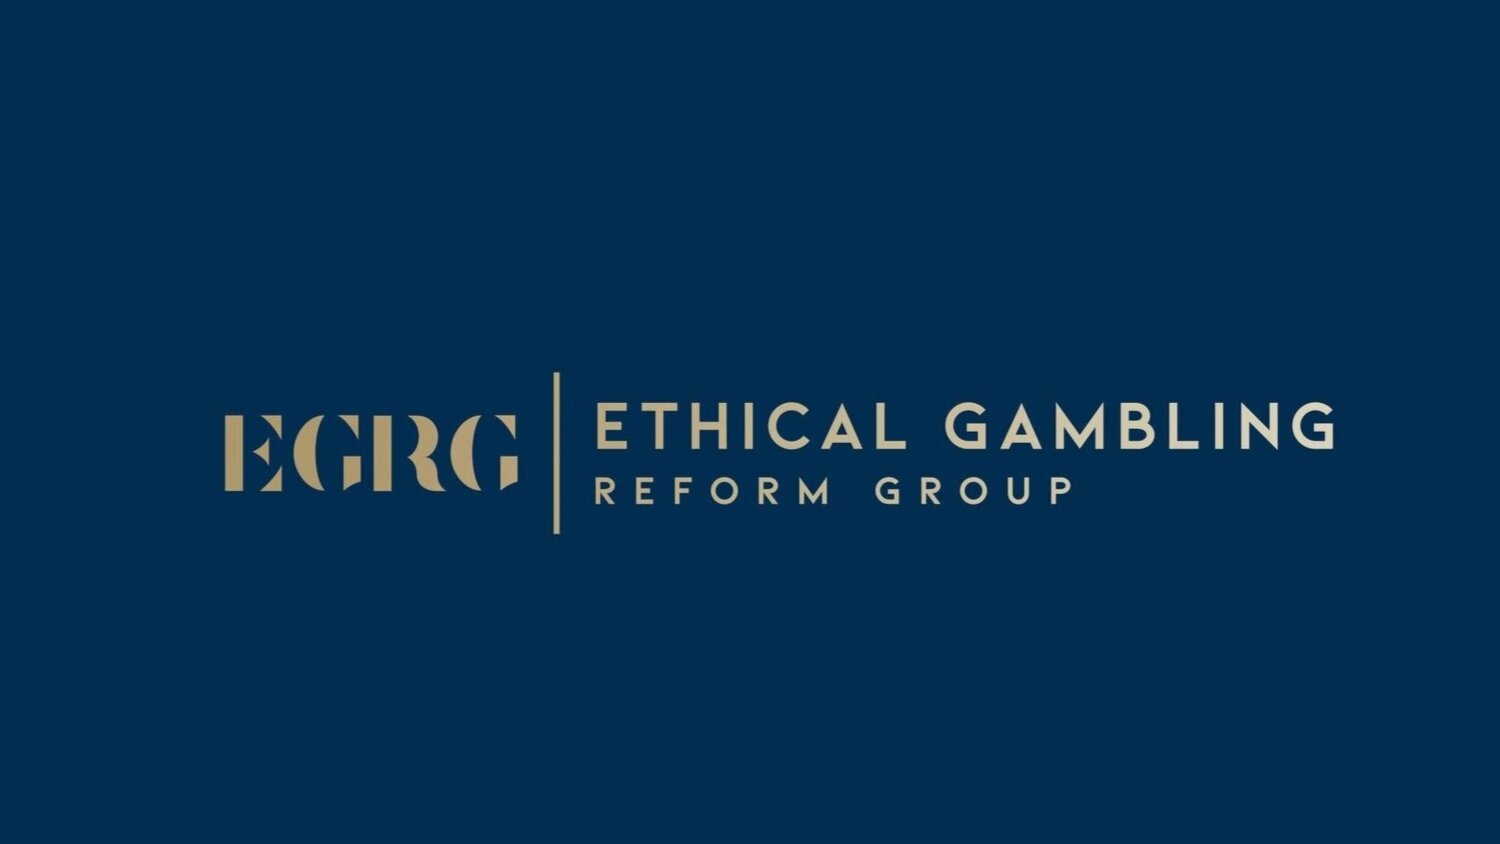 ETHICAL GAMBLING REFORM GROUP